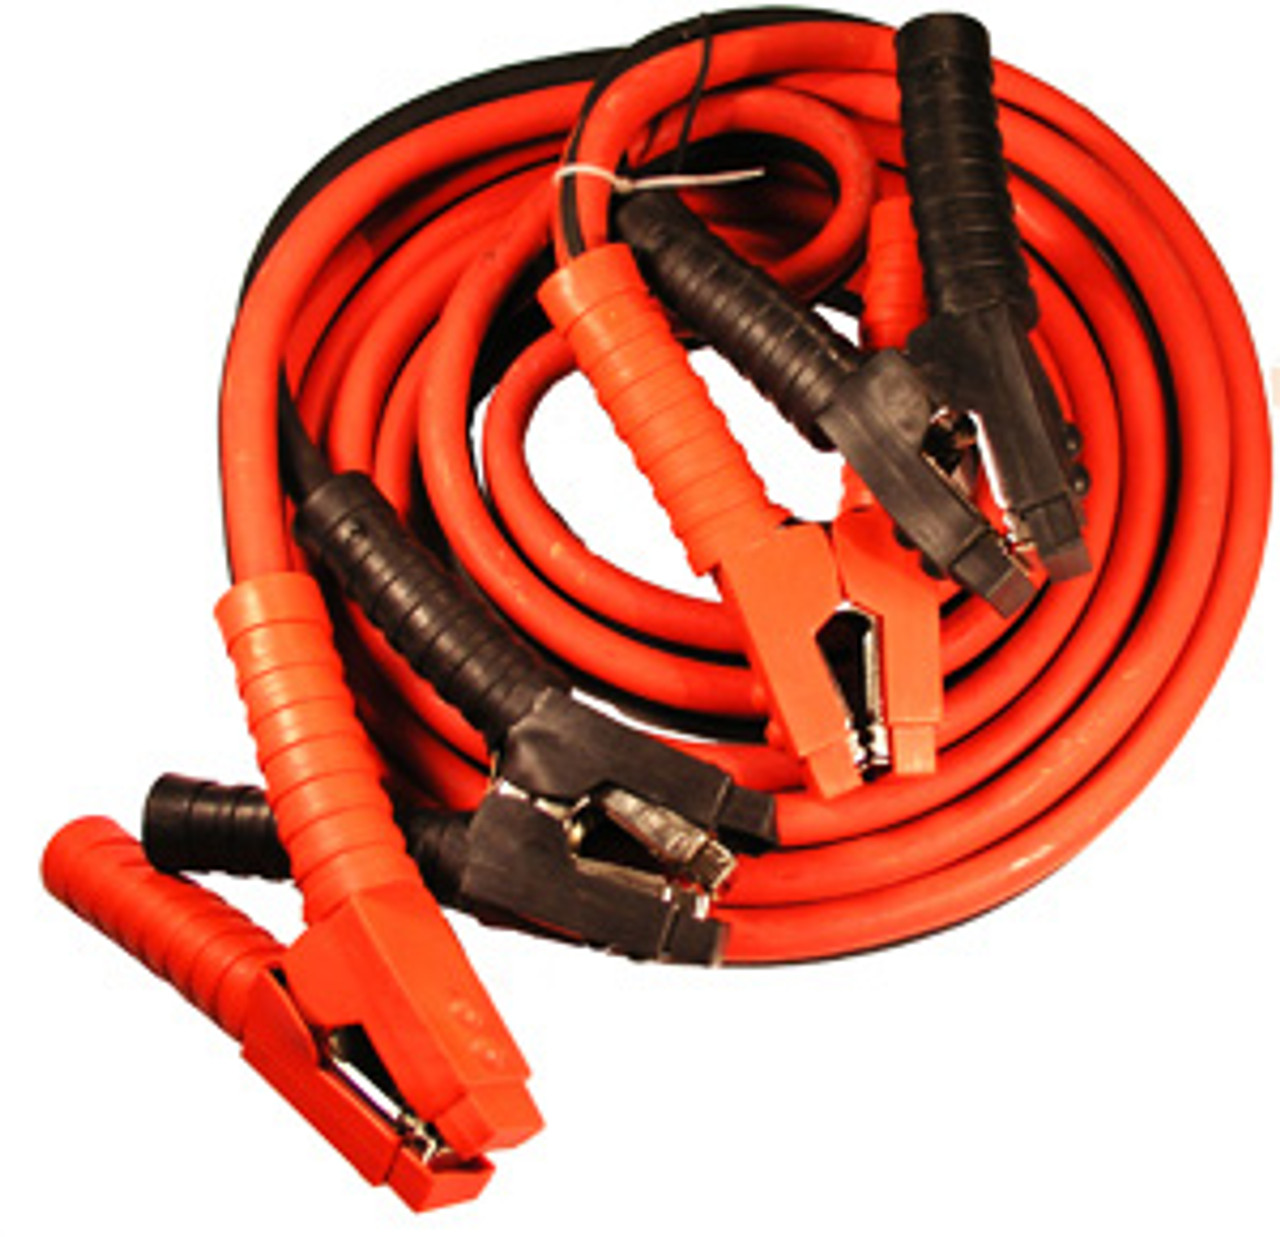 1 AWG 800A @ 20' Red & Black PVC Insulated Booster Cable Set  8180K-E